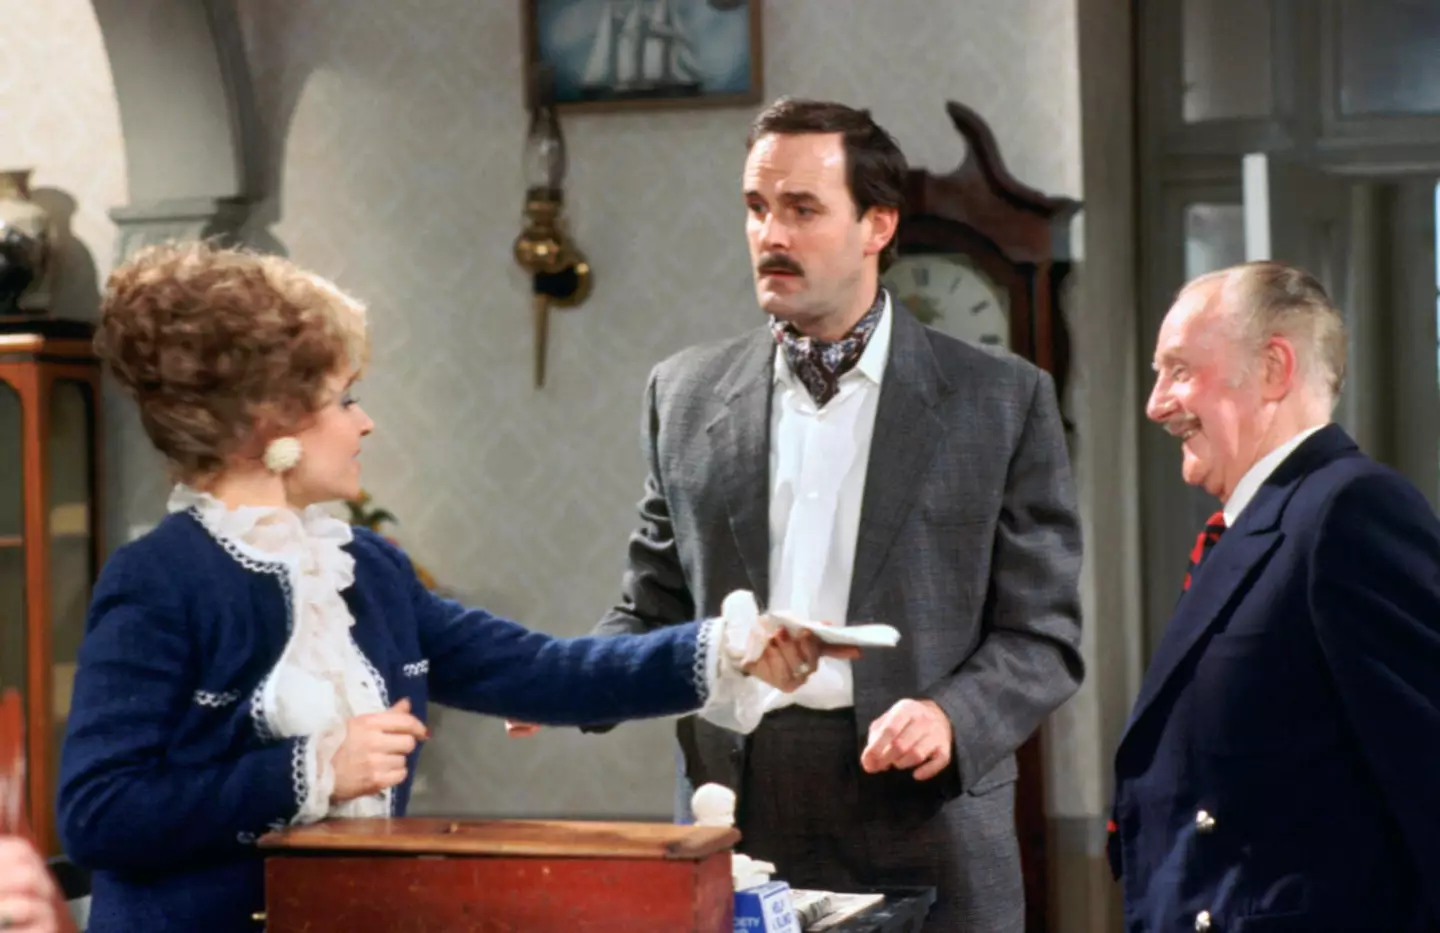 Fawlty Towers is set for a reboot 40 years after the final series aired and we are very excited.